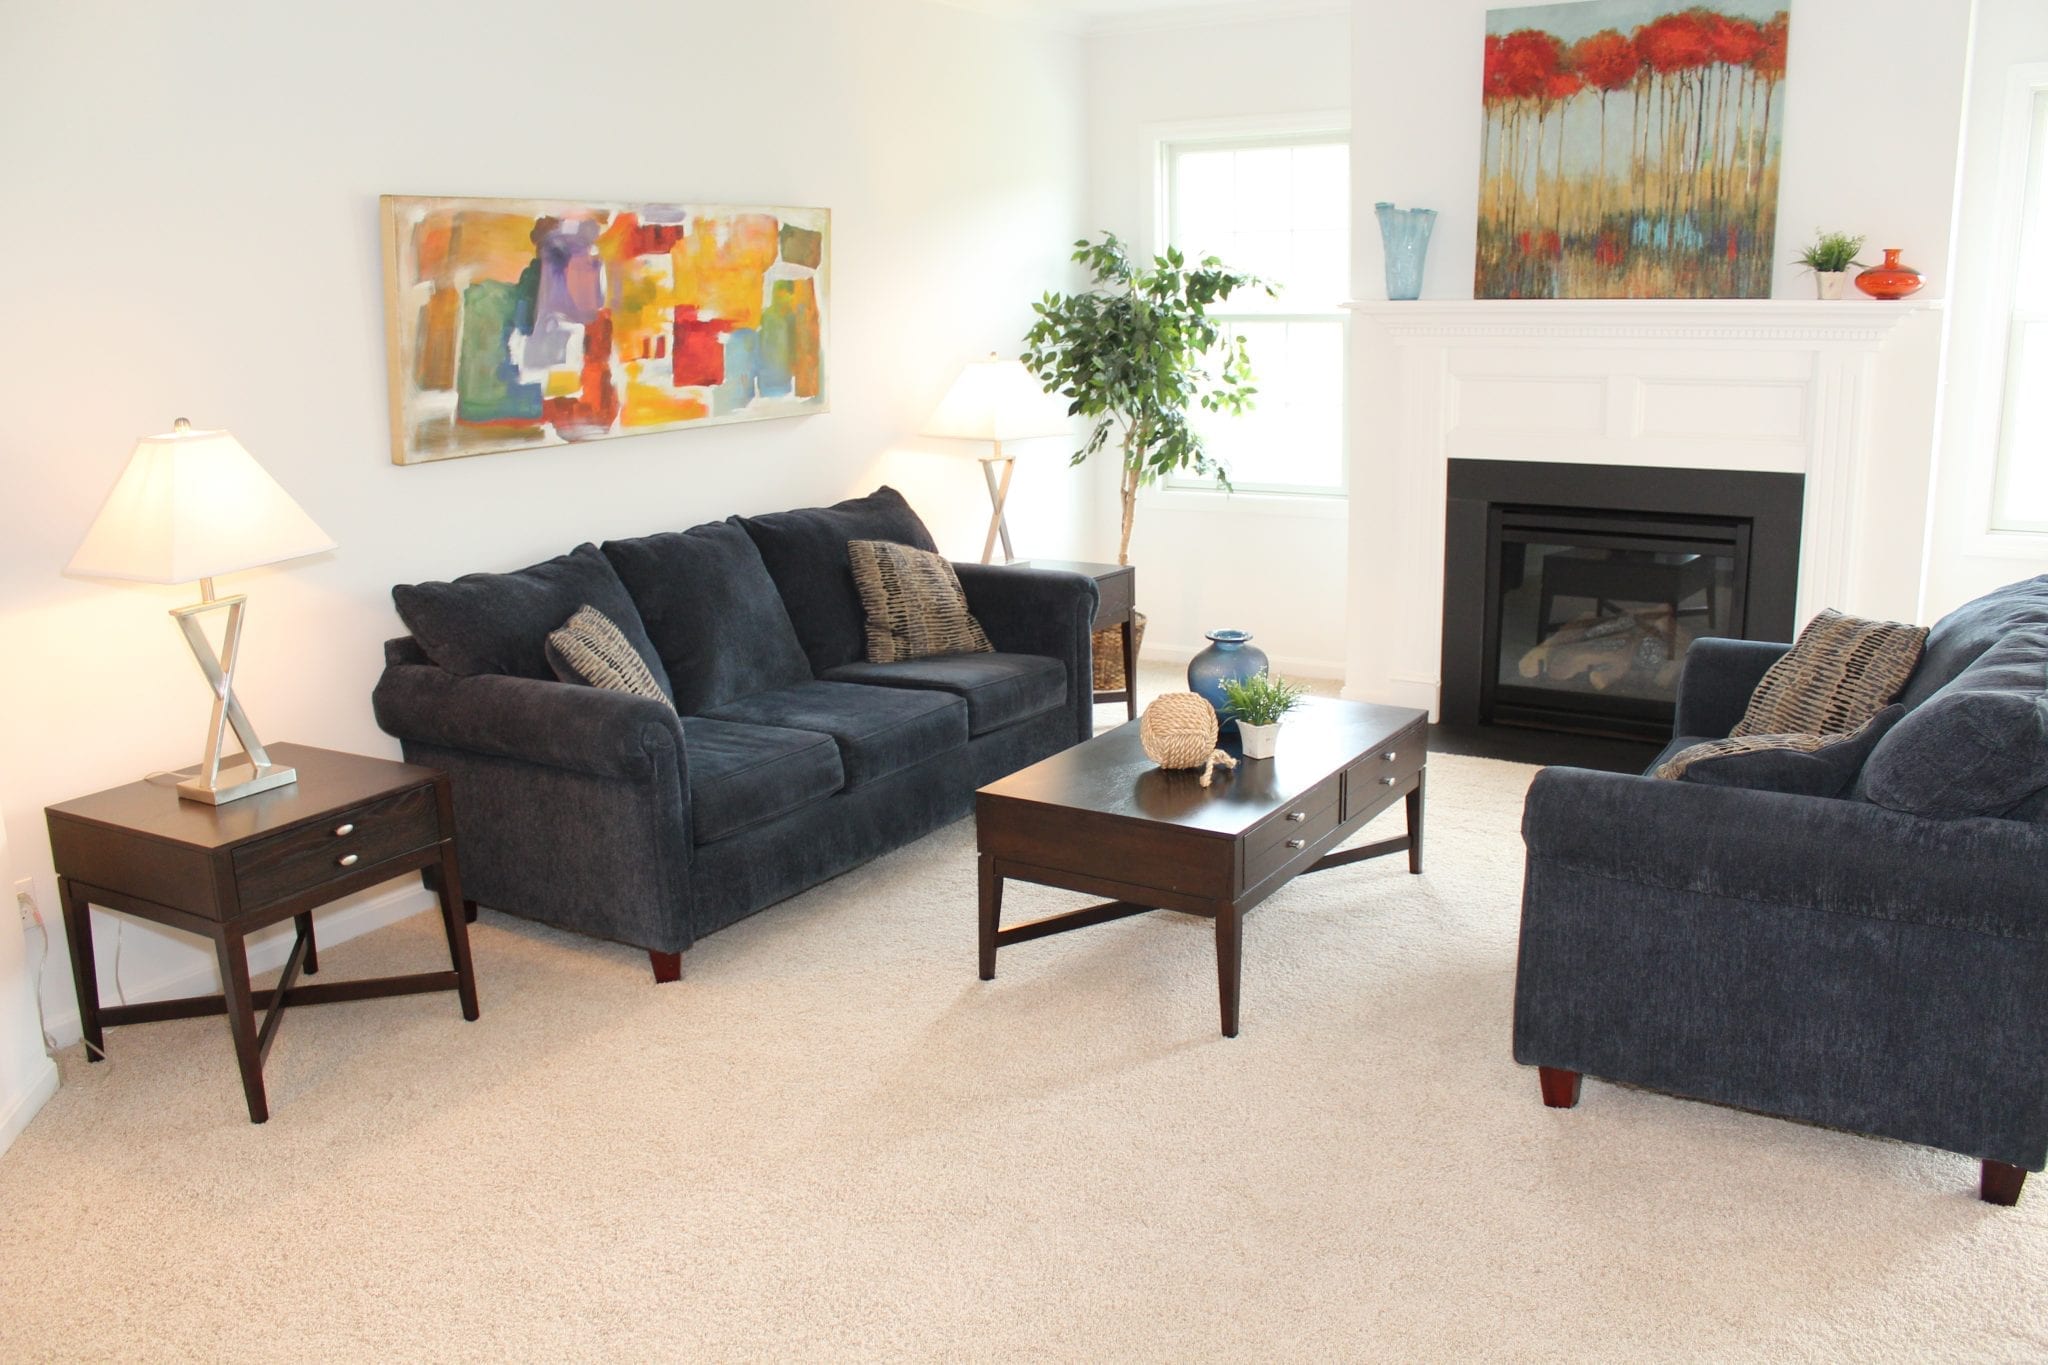 Home Staging for Real Estate